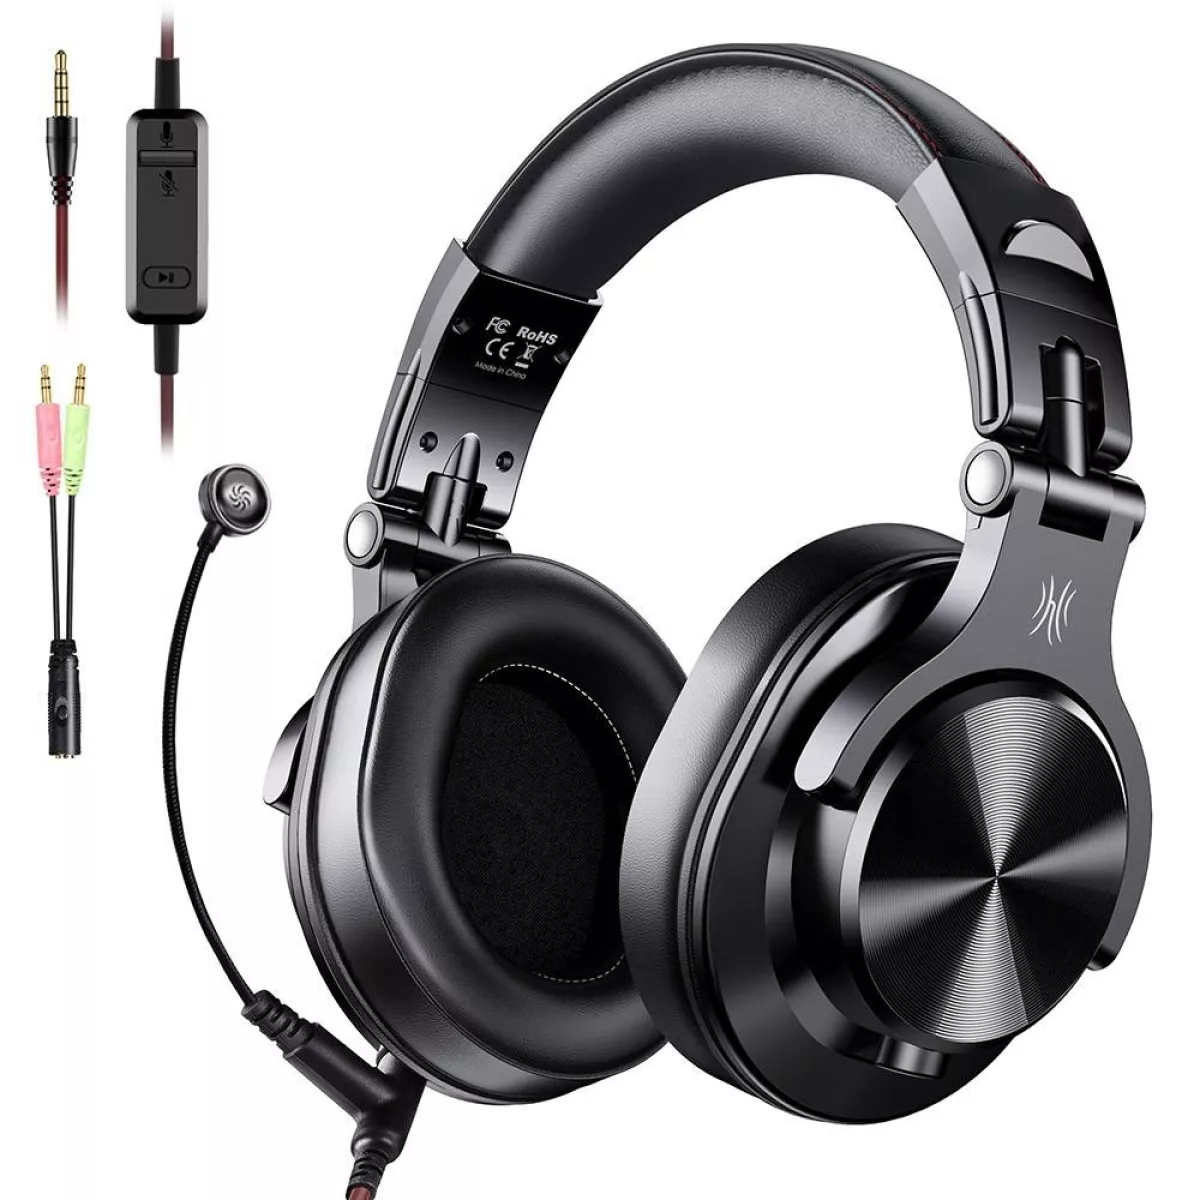 #1 - ONEODIO A71 - Headset med Justerbar mikrofon til gaming/PS4/Nintendo switch - Sort